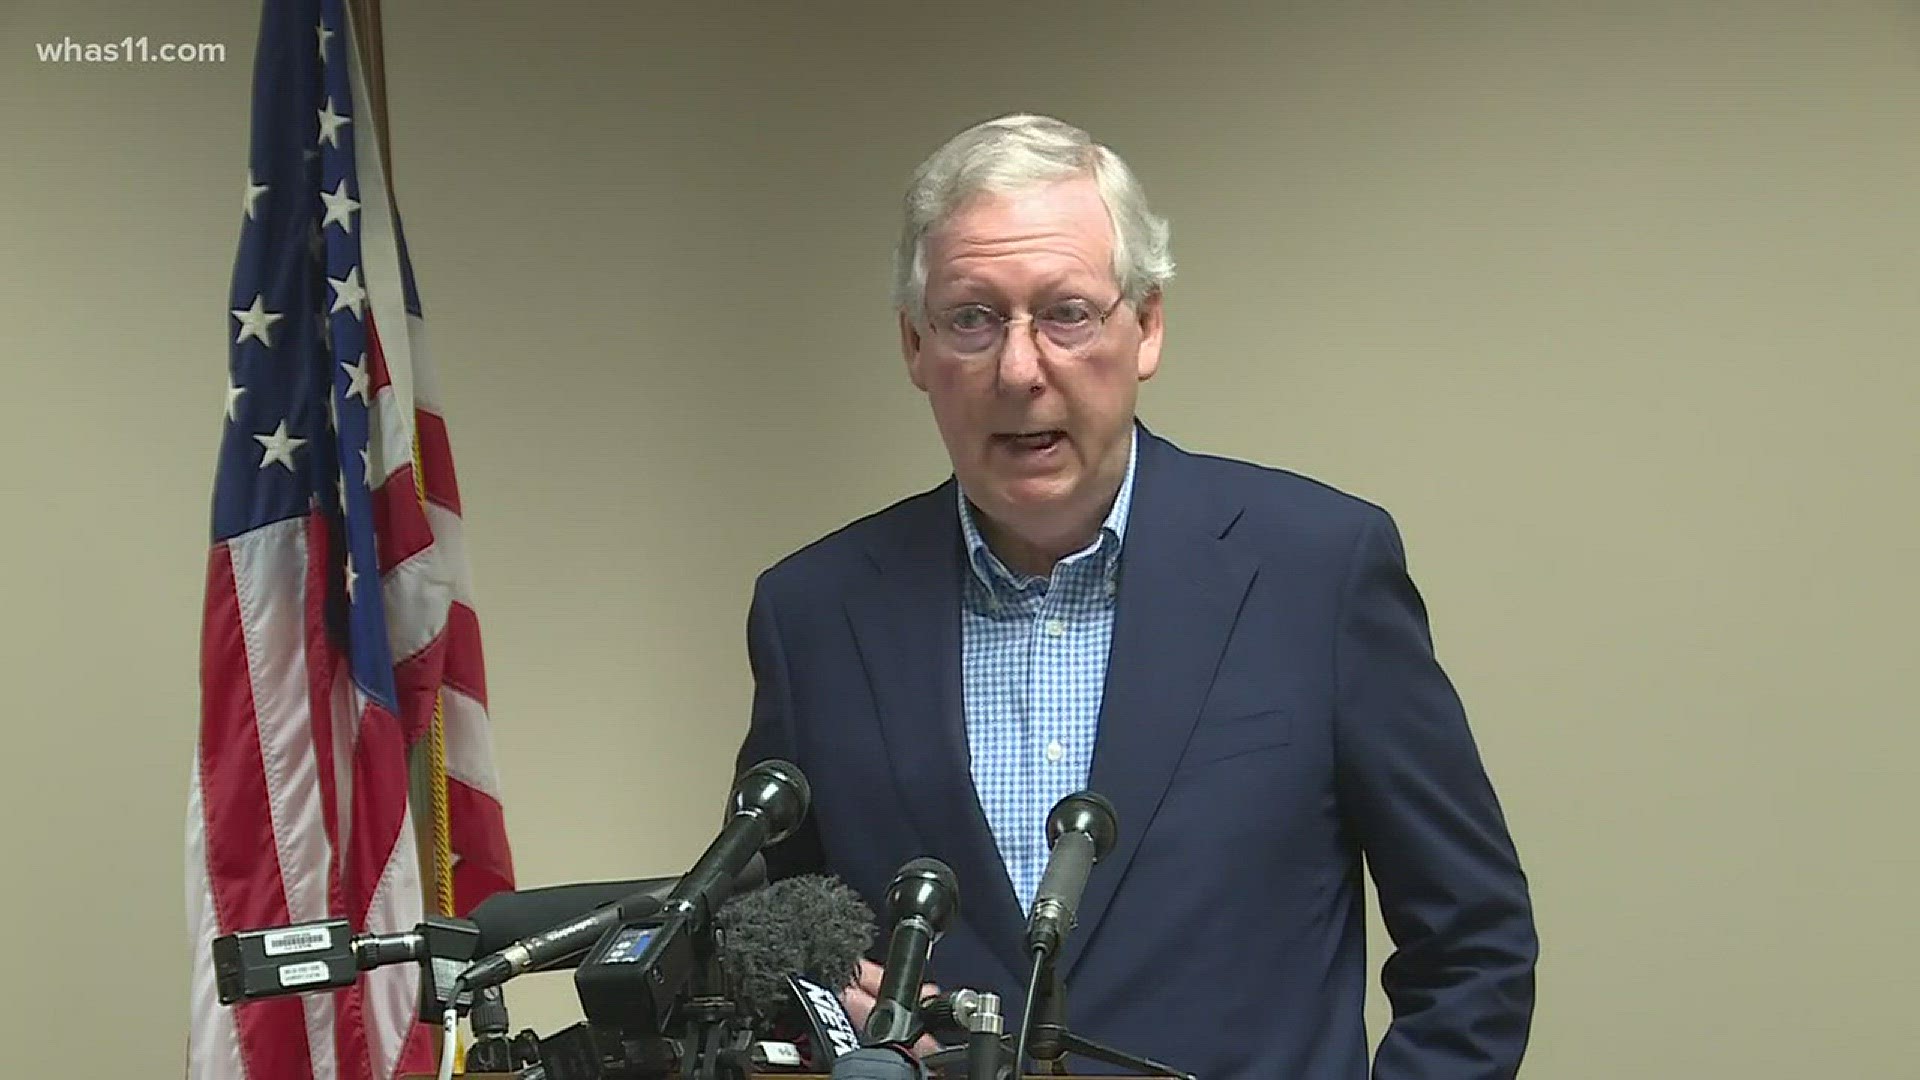 McConnell is a big UofL fan and he said he had complete confidence in the new president Neeli Bendapudi.